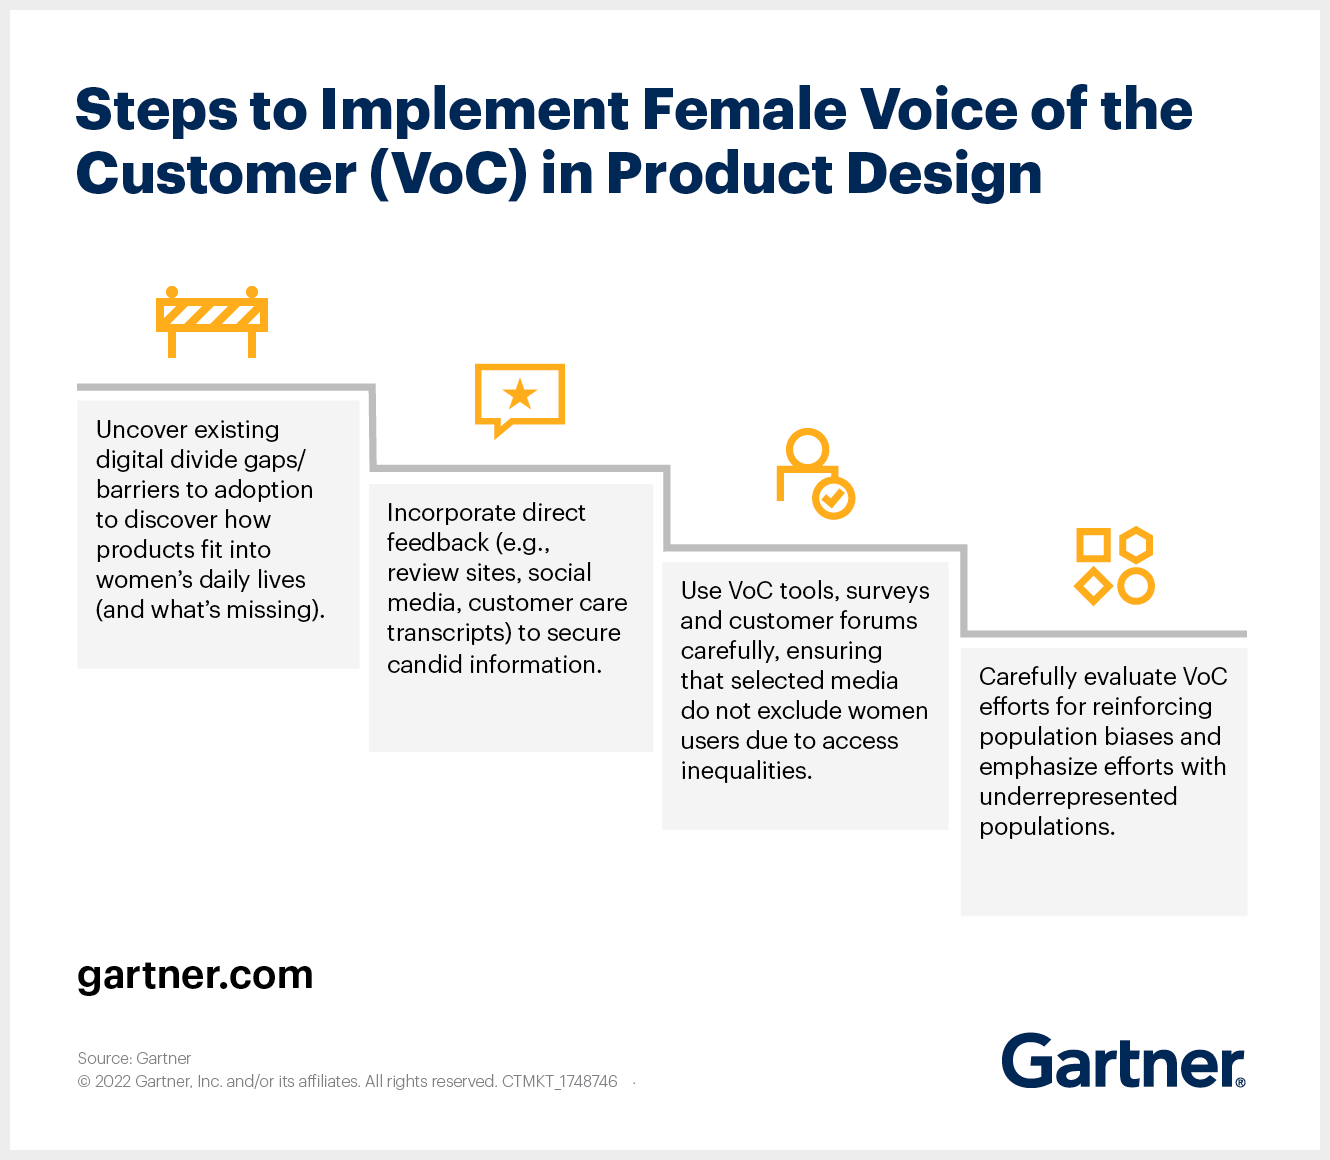 Steps to Implement Female Voice of the Customer (VoC) in Product Design